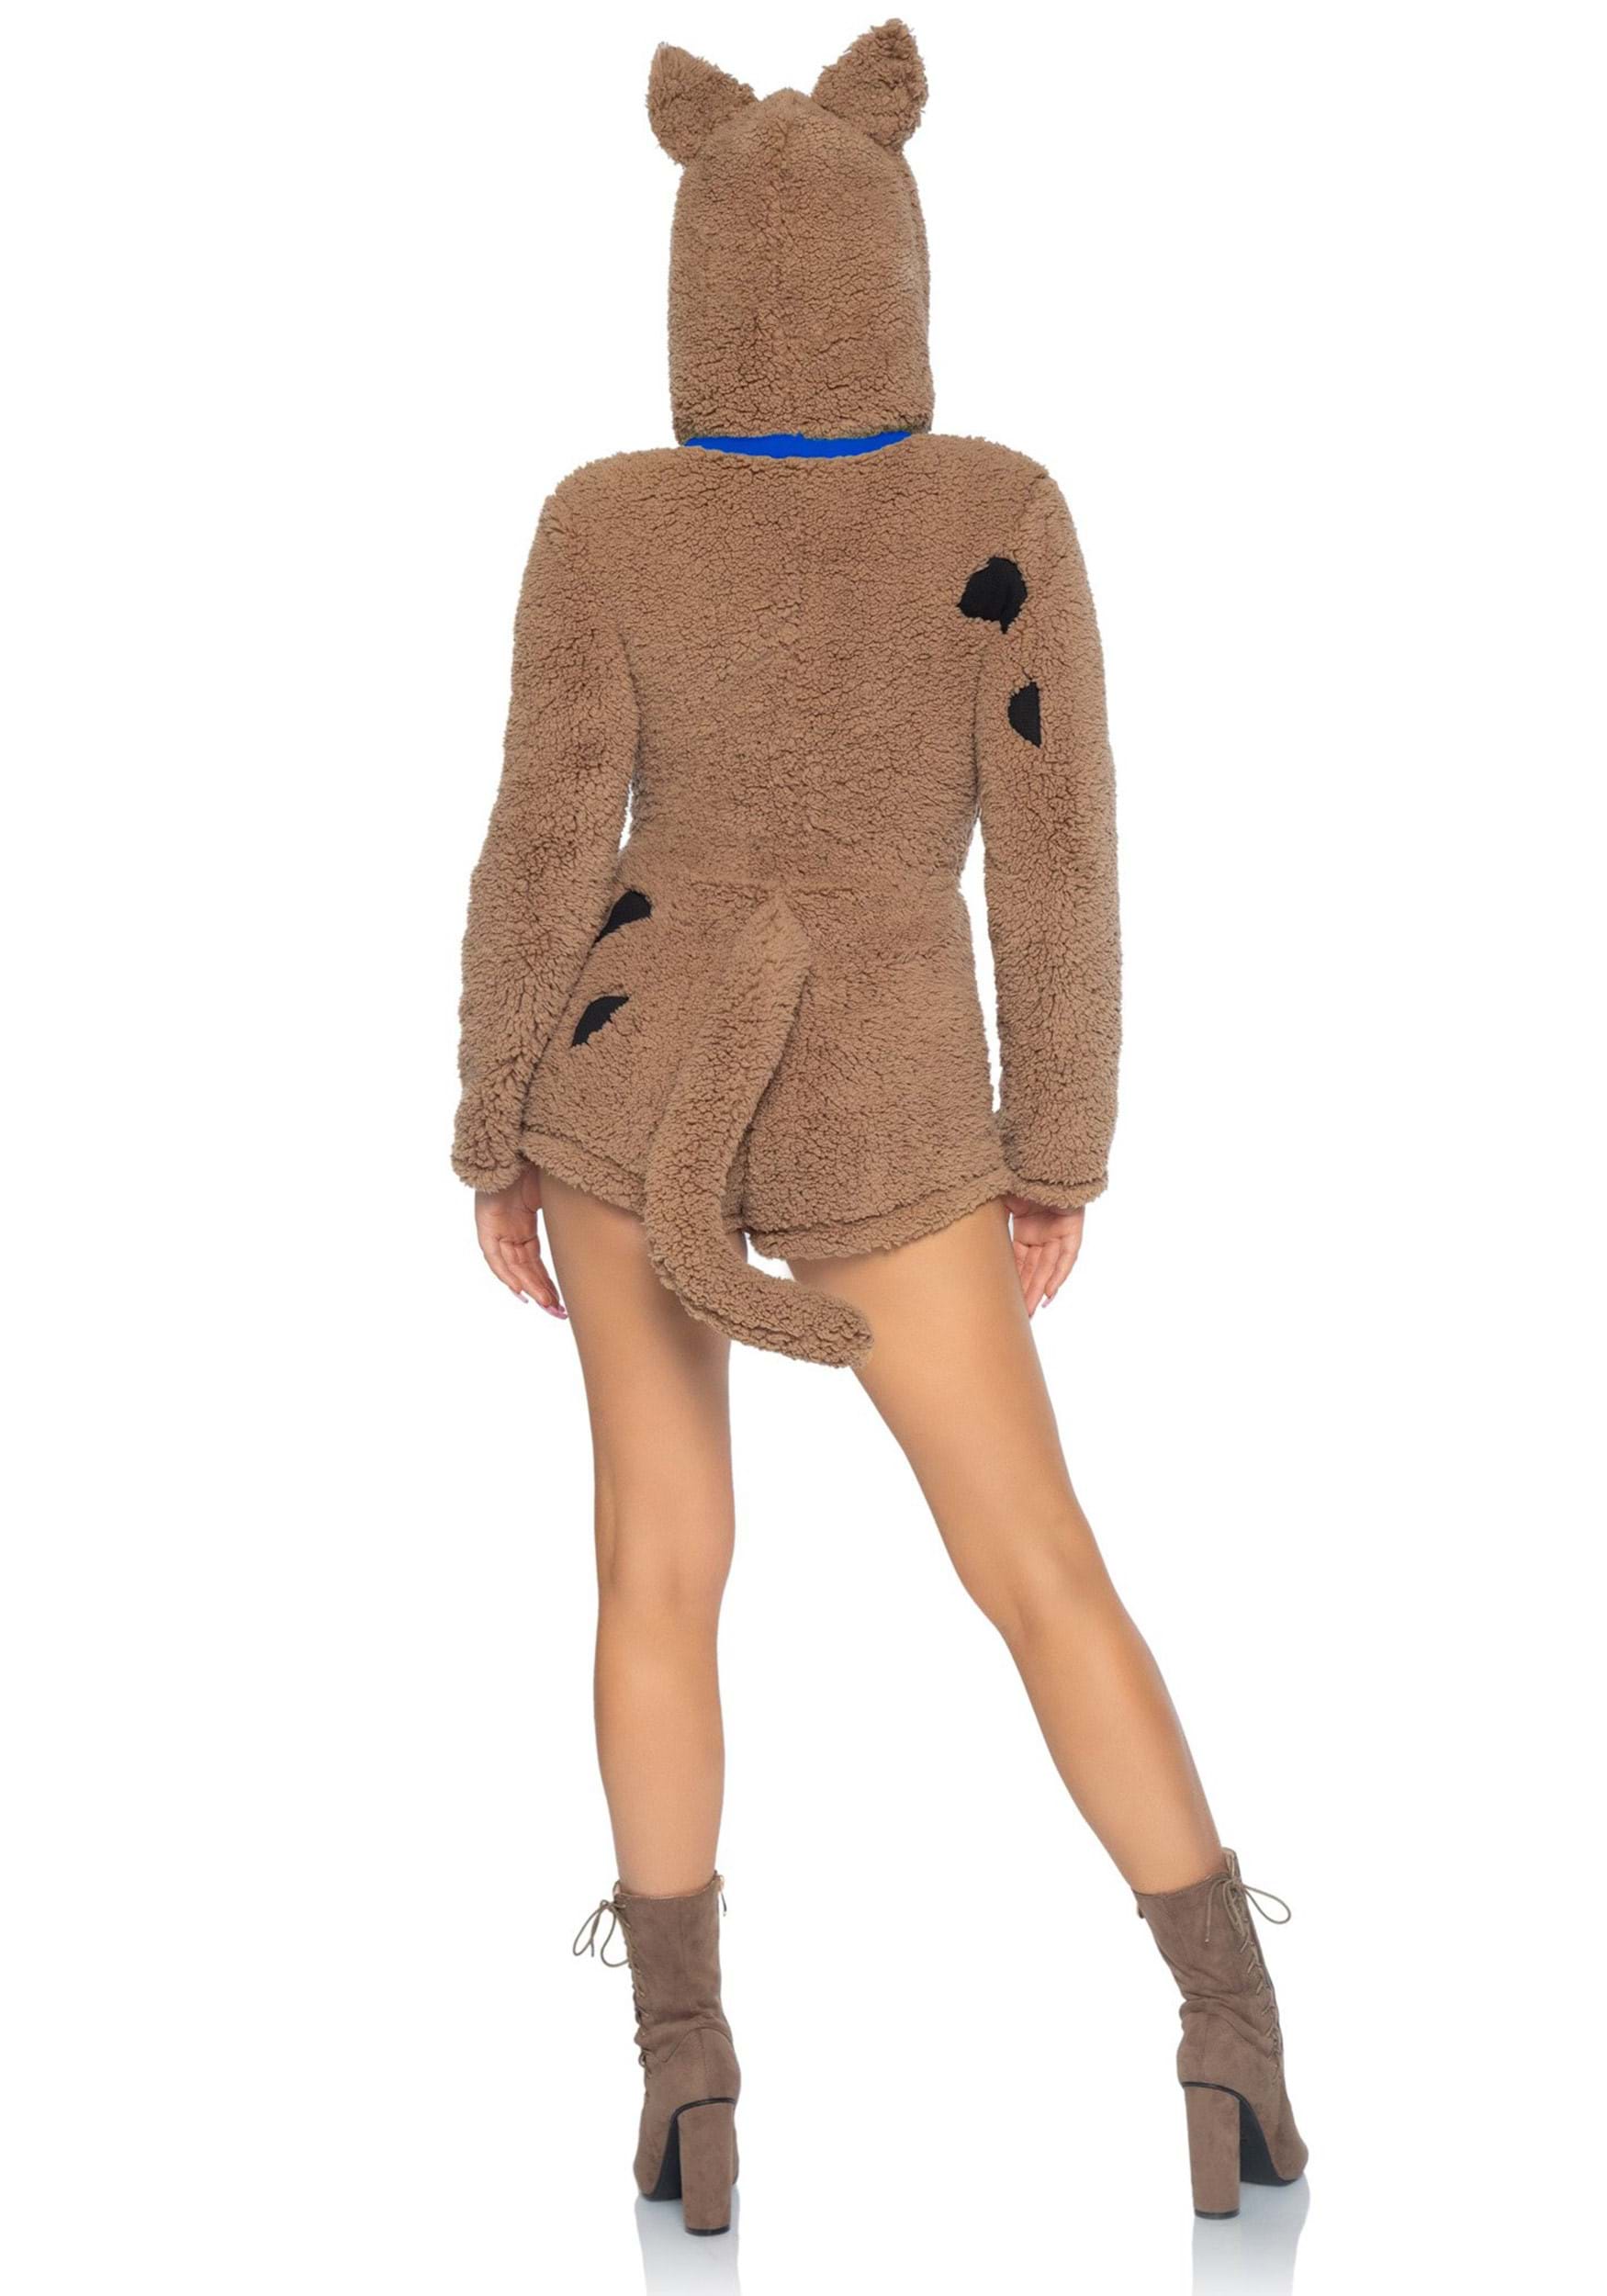 Sexy Women's Mystery Pup Costume